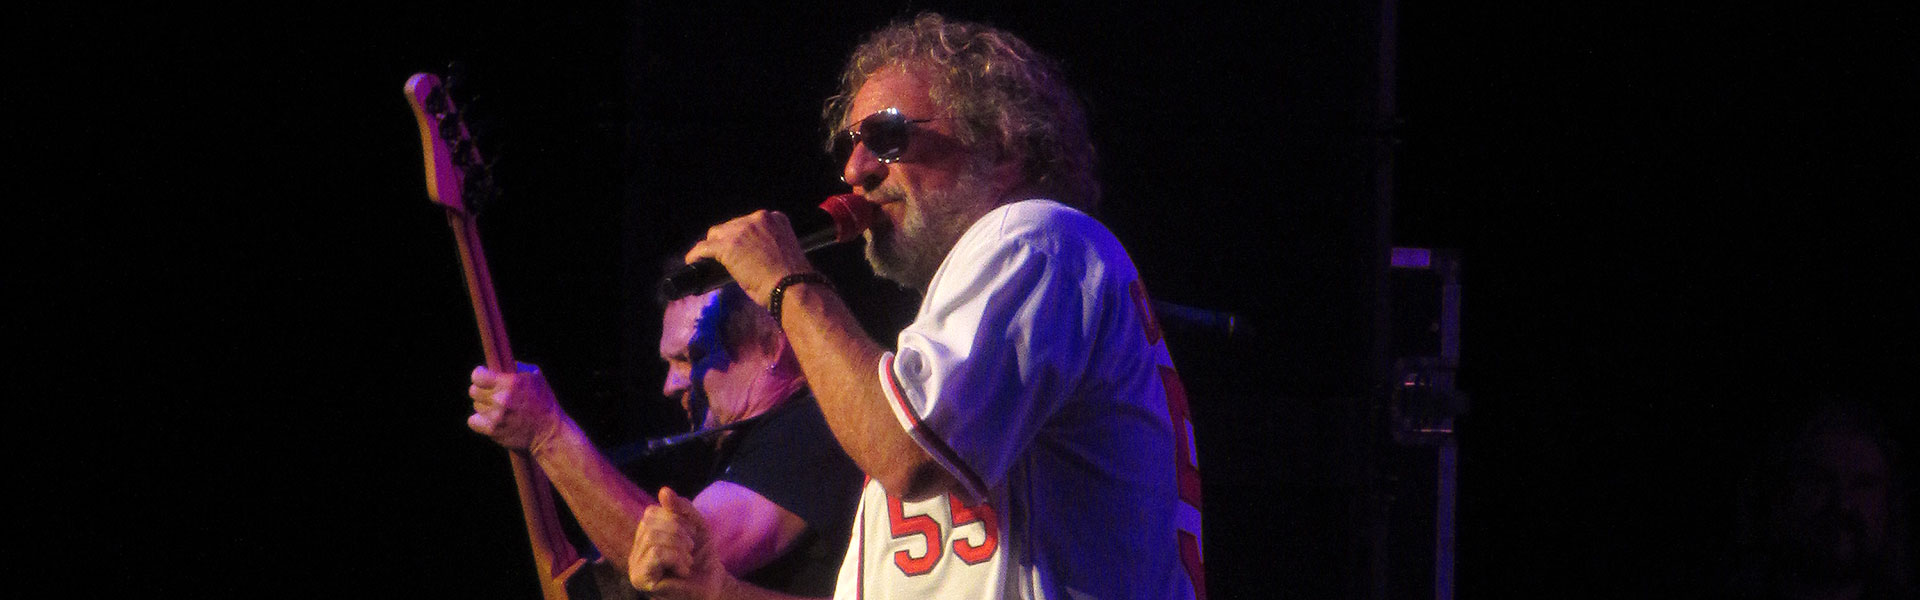 Sammy Hagar and the Circle in concert